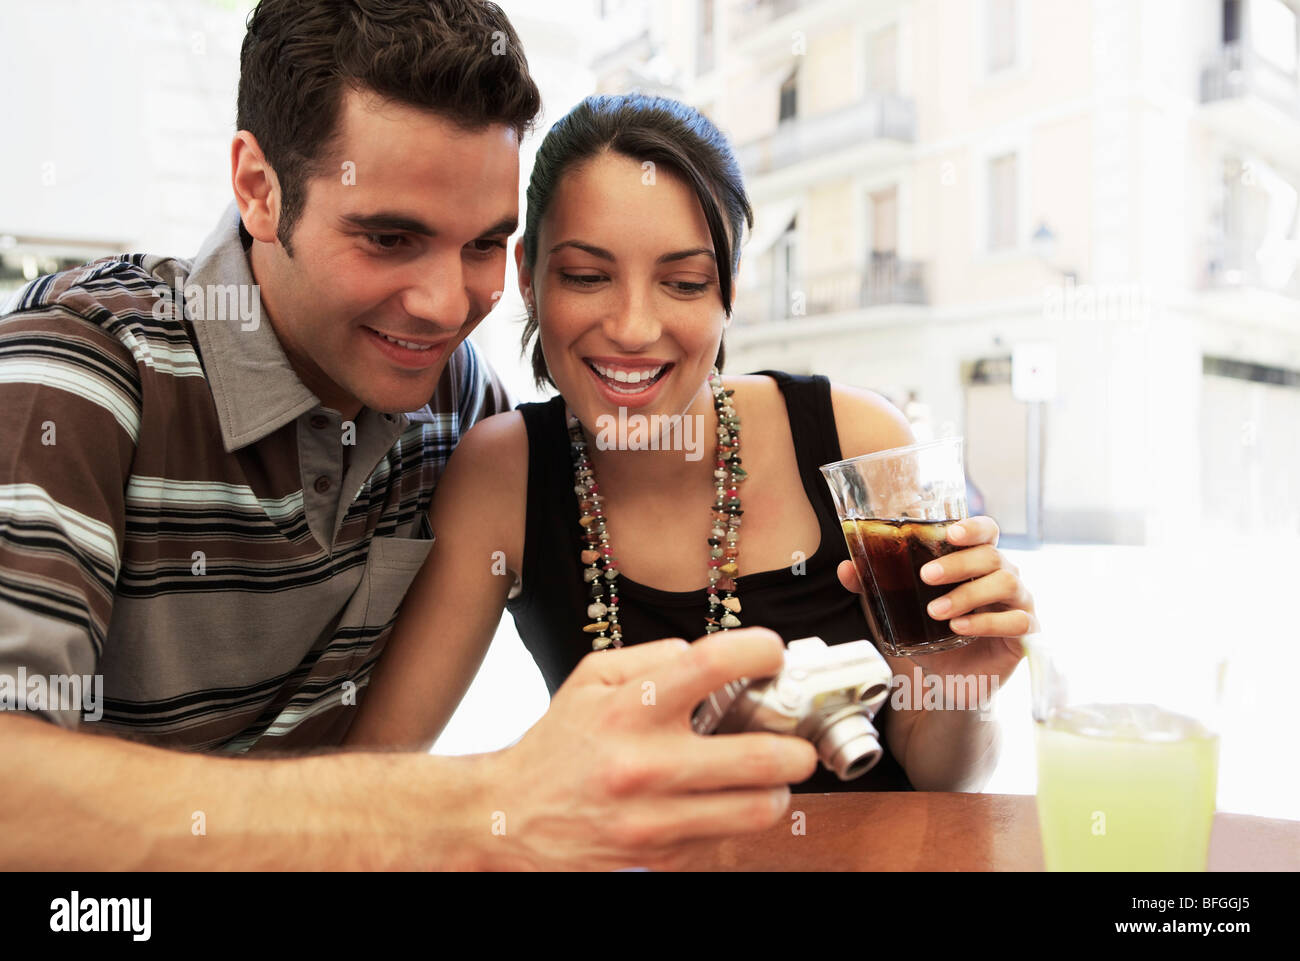 Young couple at cafe looking at camera together, portrait Stock Photo